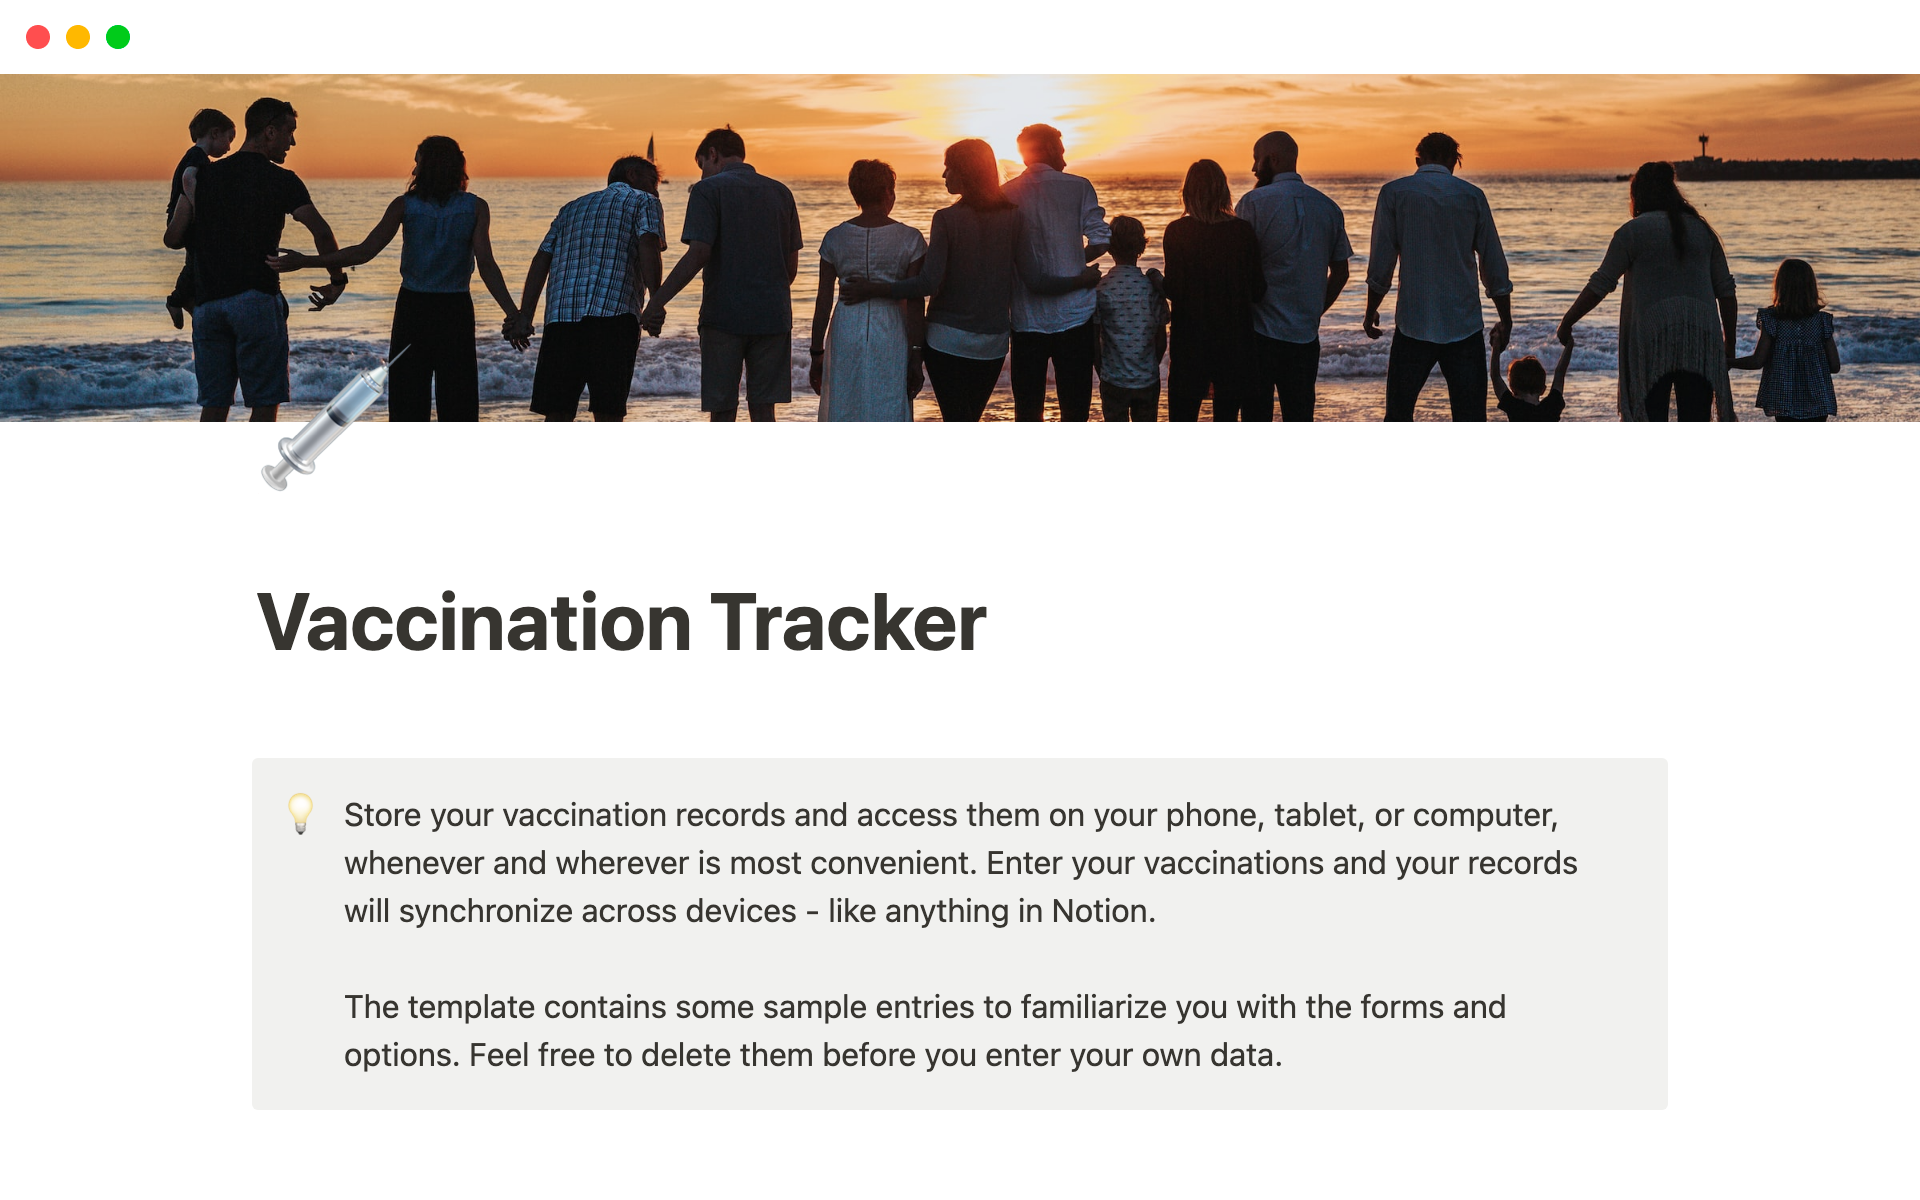 Store your and your families vaccination records so you can access them on your phone, tablet, or computer, whenever and wherever is most convenient.